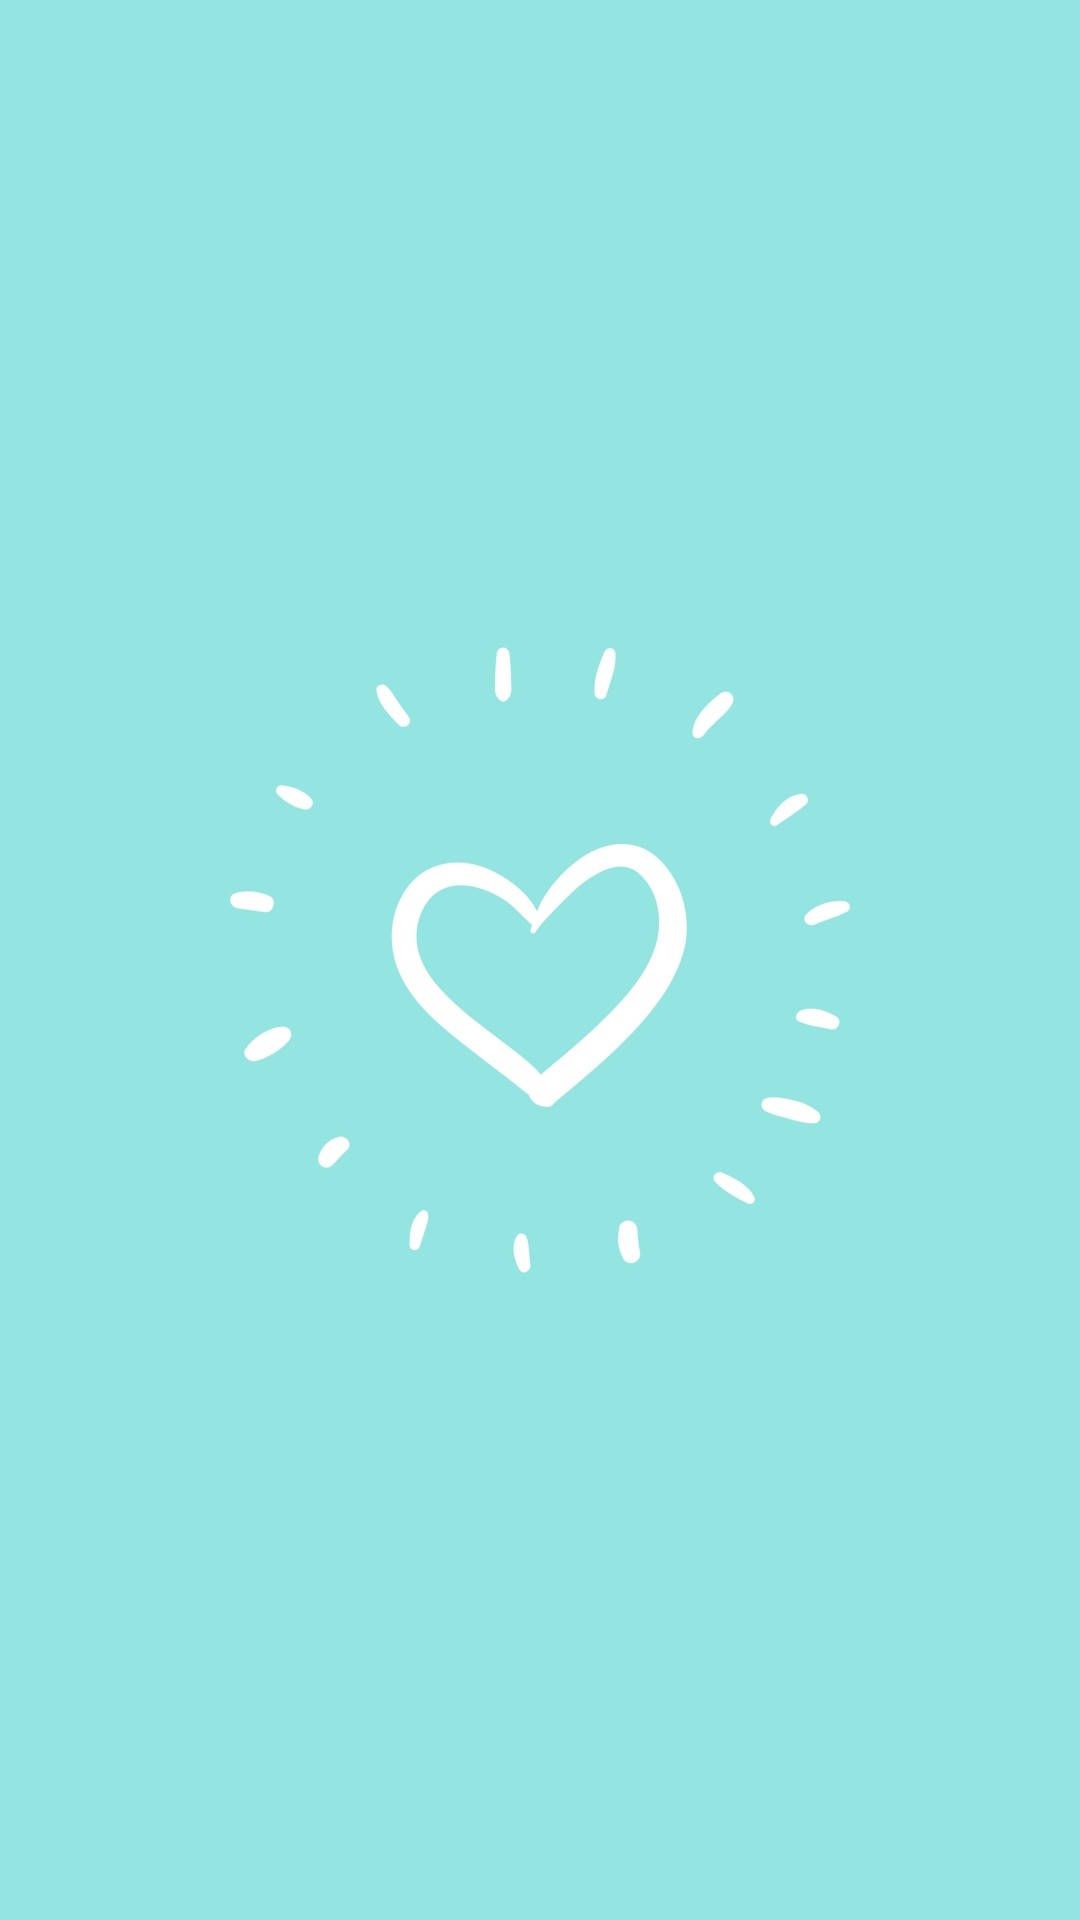 A white heart outline on a light blue background - Teal